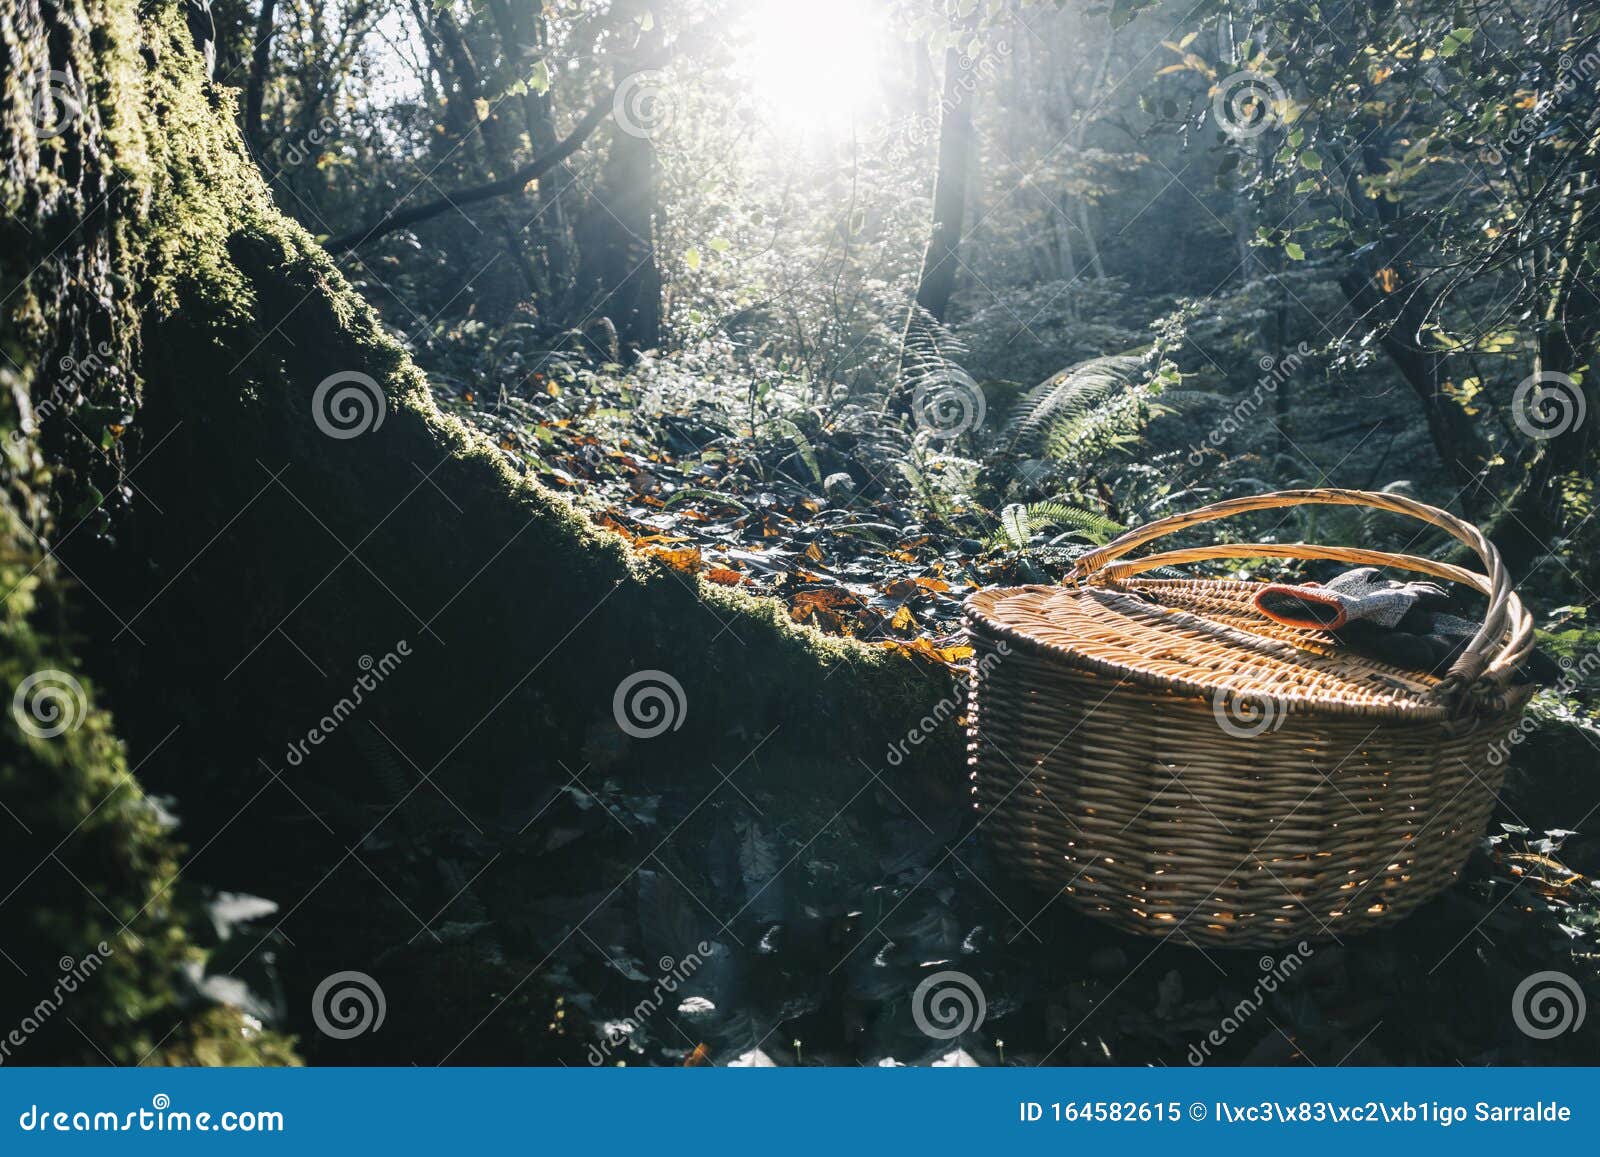 wicker basket and gloves from chestnut recollection in the forest with backlighting